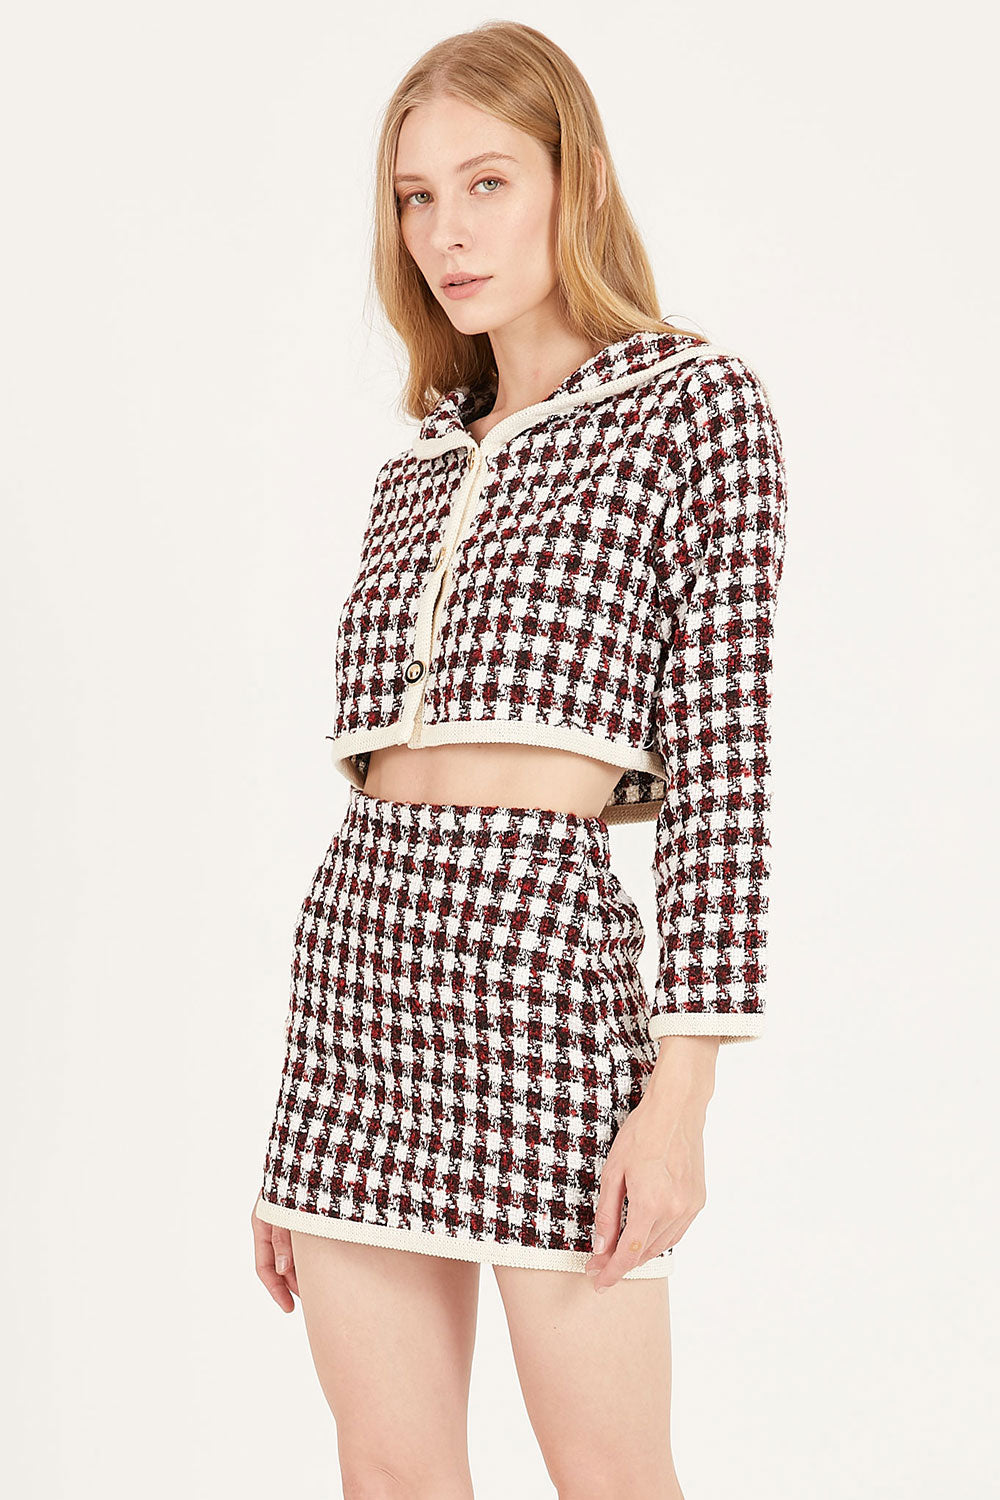 STORETS Reese Houndstooth Jacket and Skirt Set - S/M Red